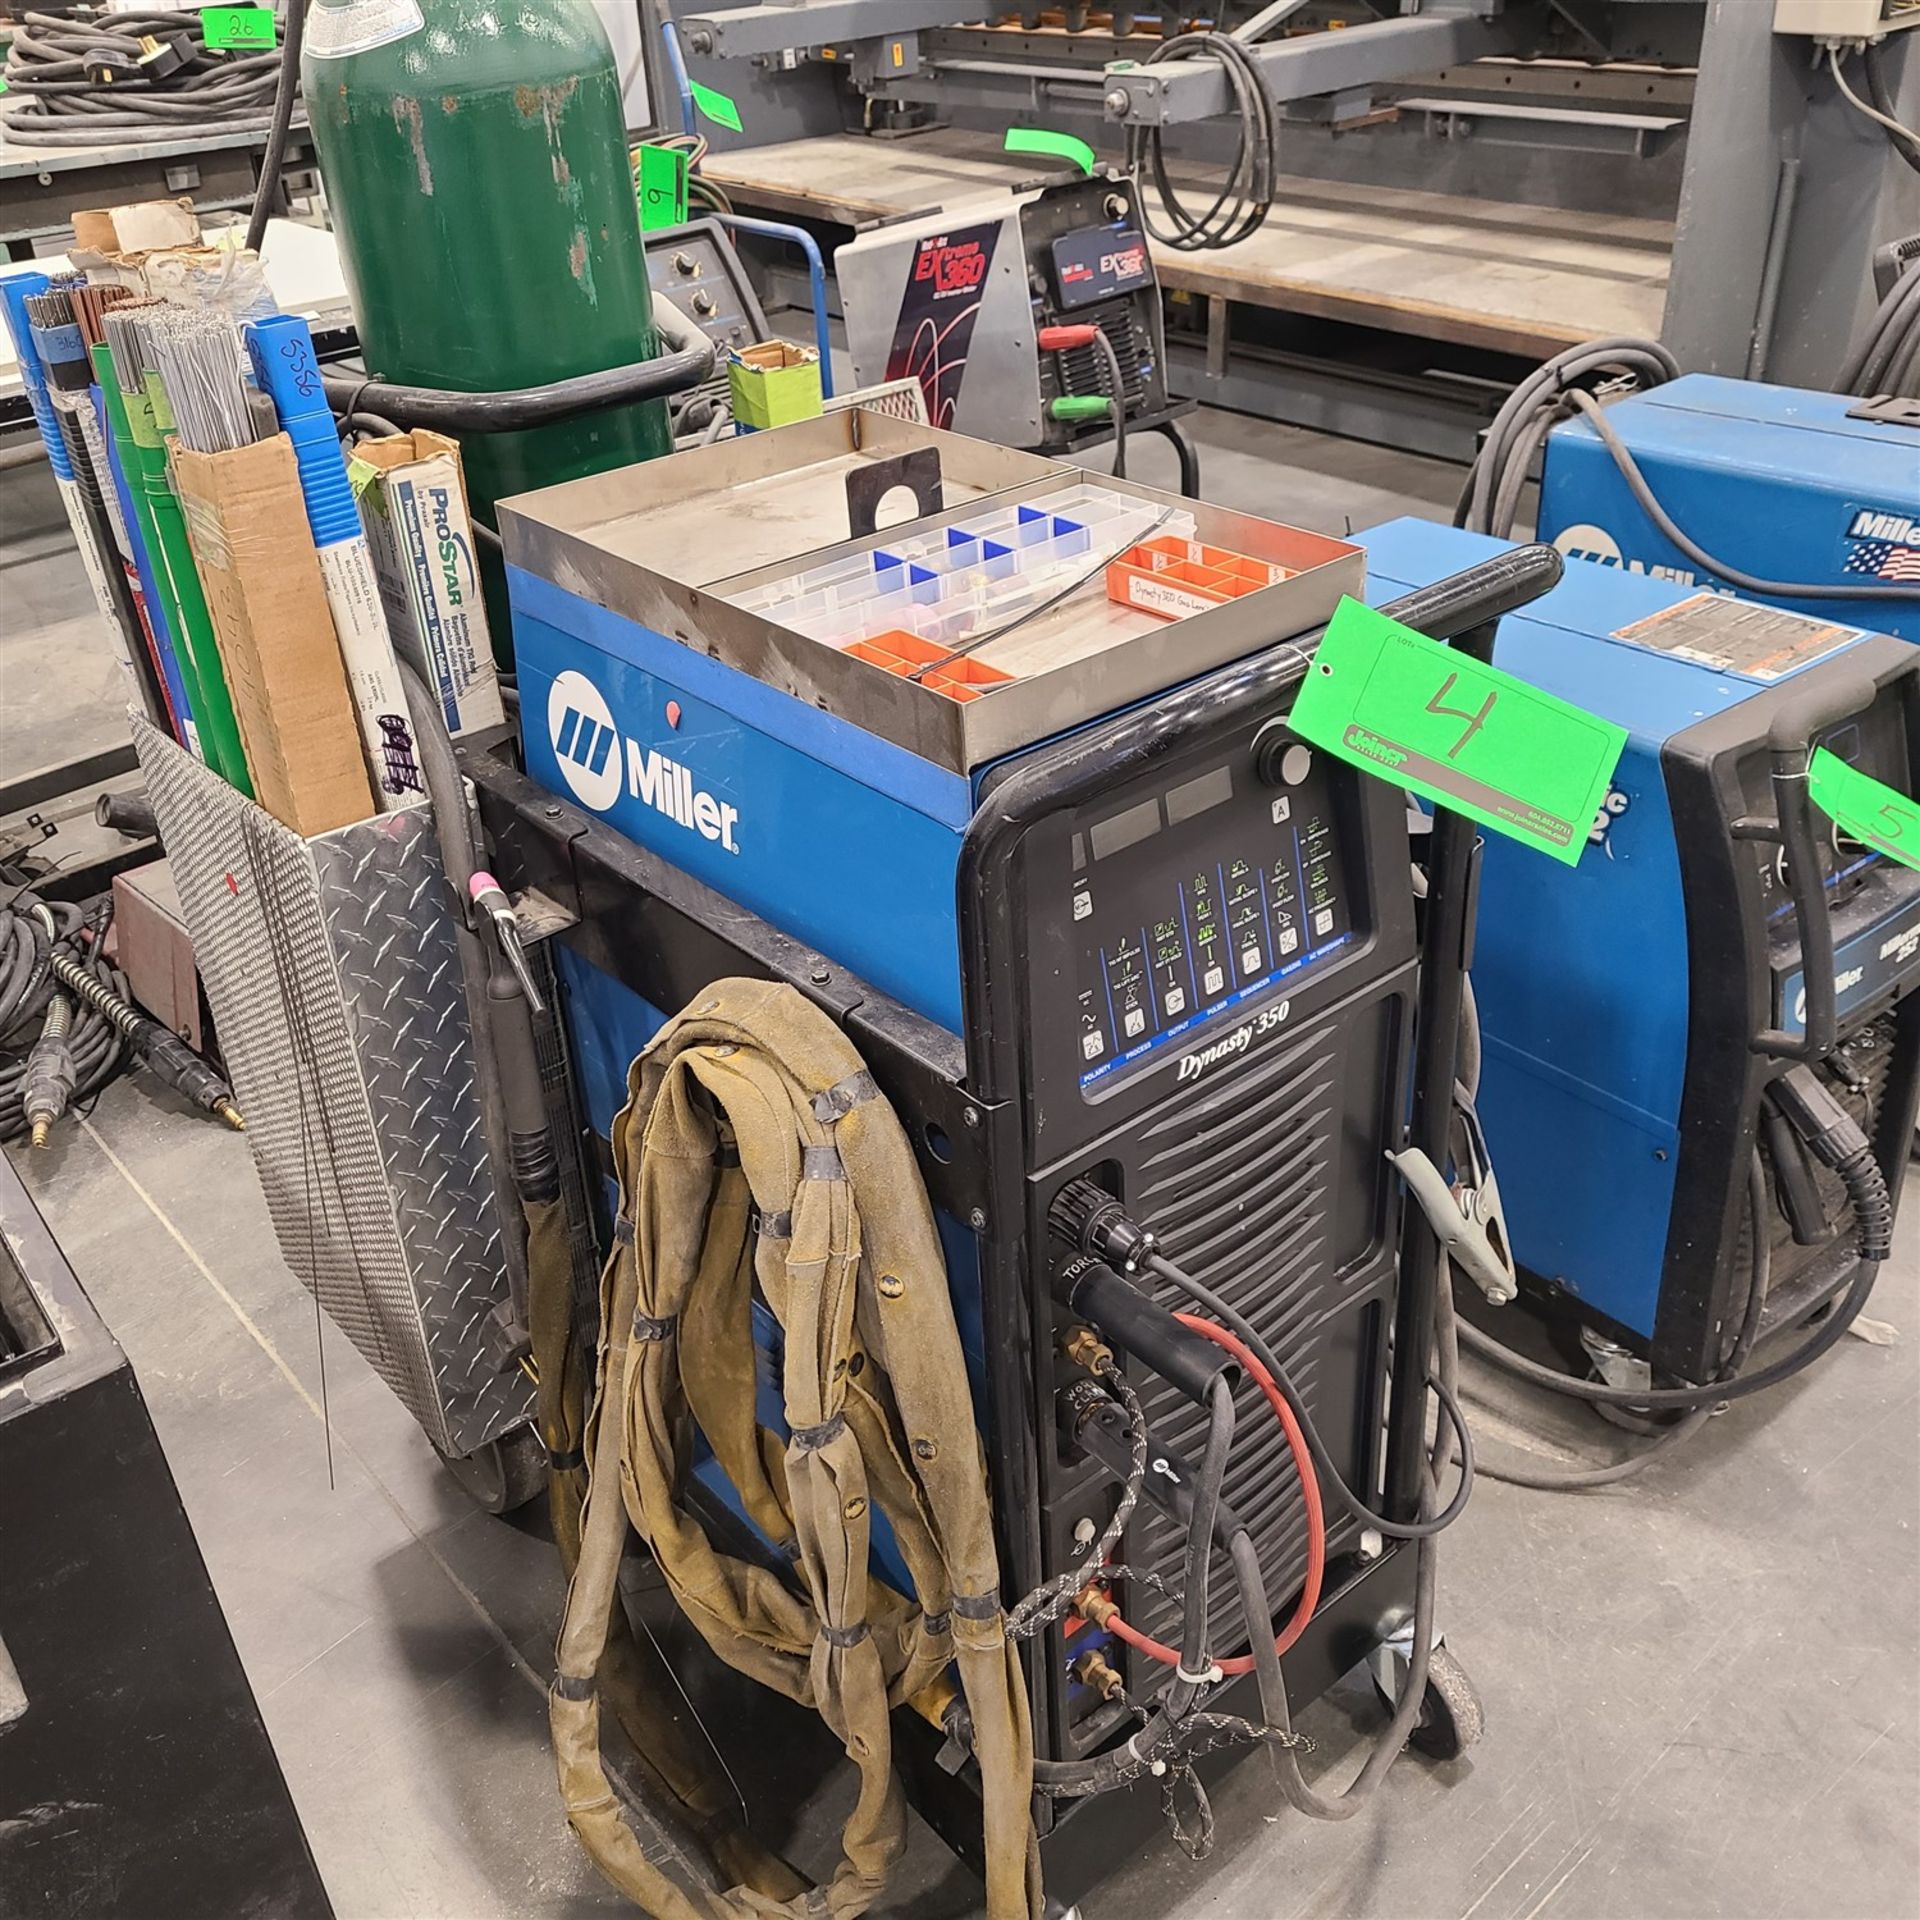 MILLER DYNASTY 350 AC/DC TIG AND STICK, WATER COOLED WELDER